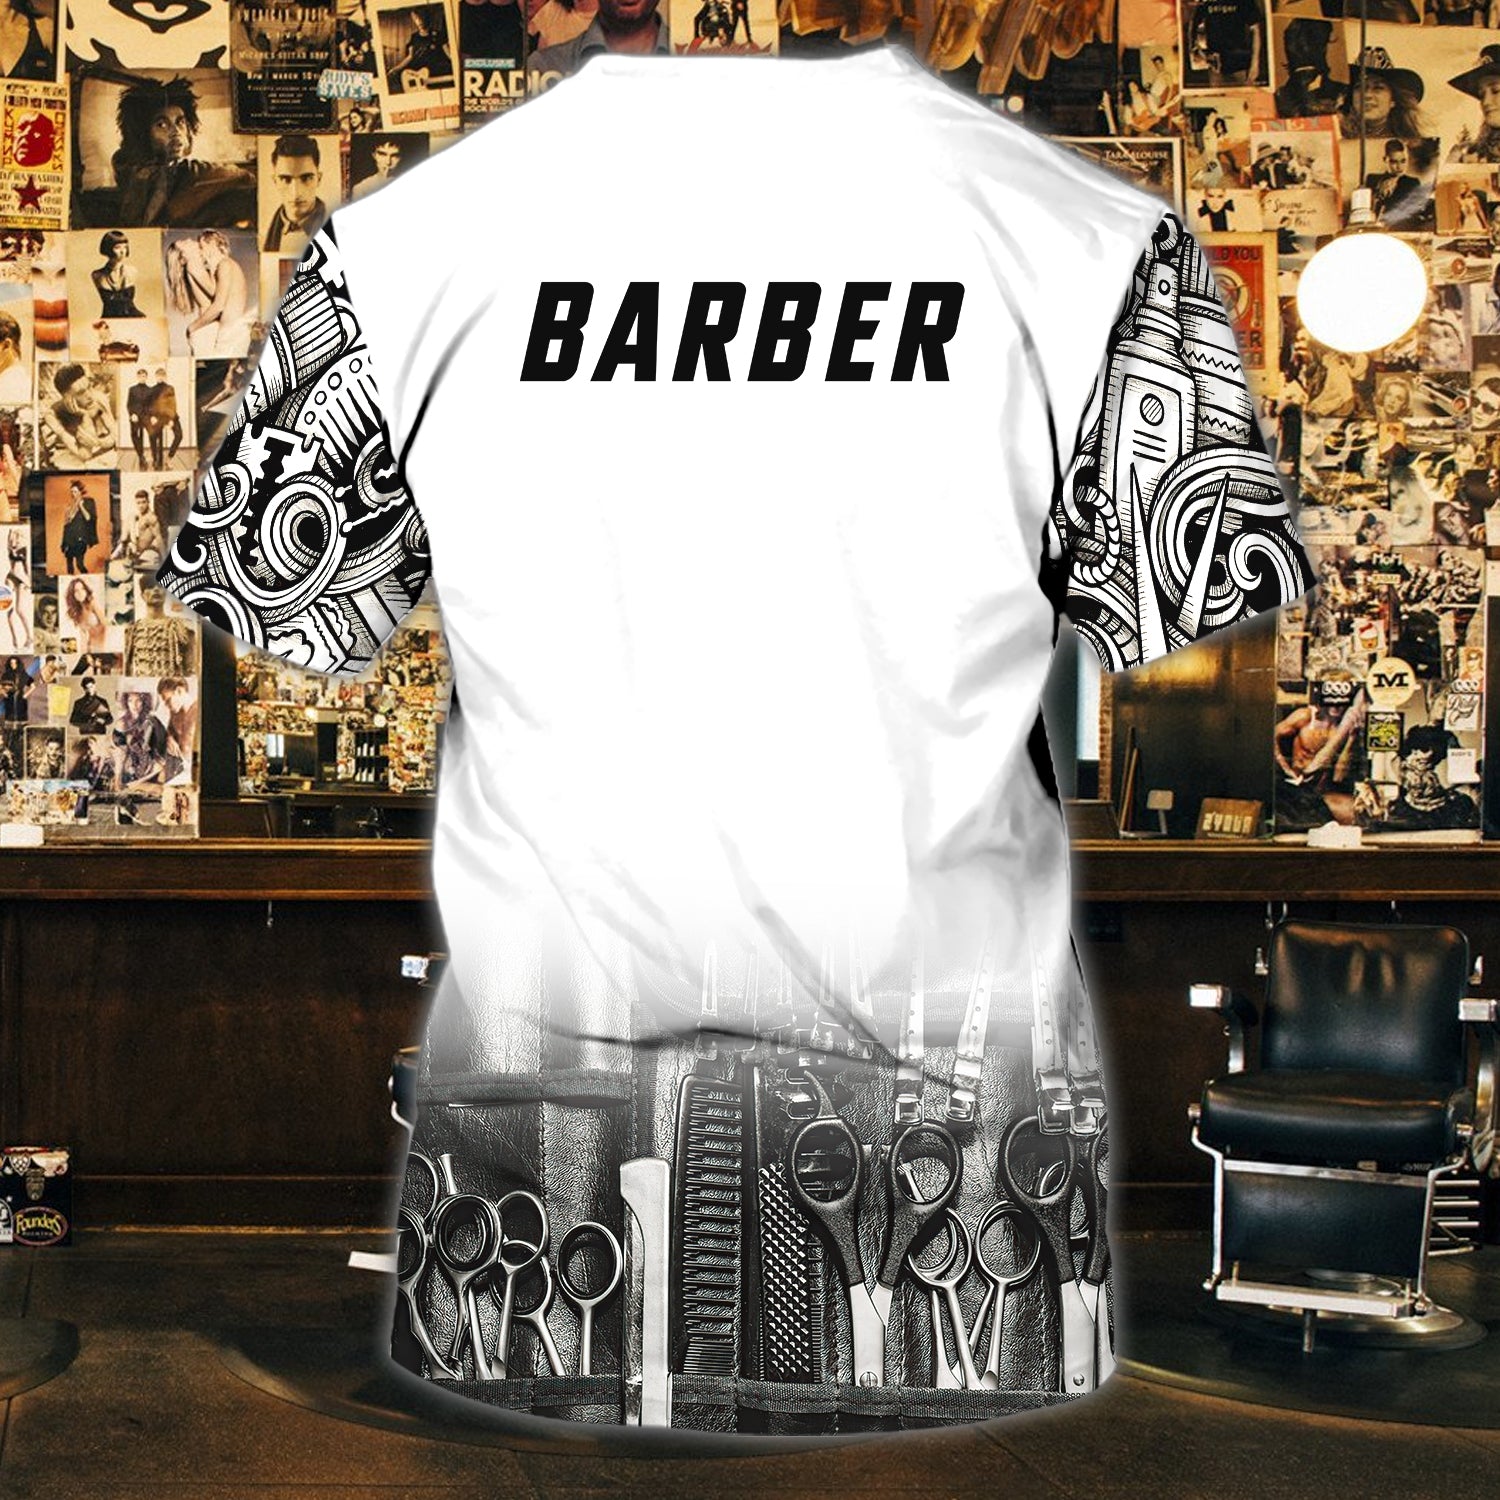 BARBER - Personalized Name 3D Tshirt 01 - RINC98